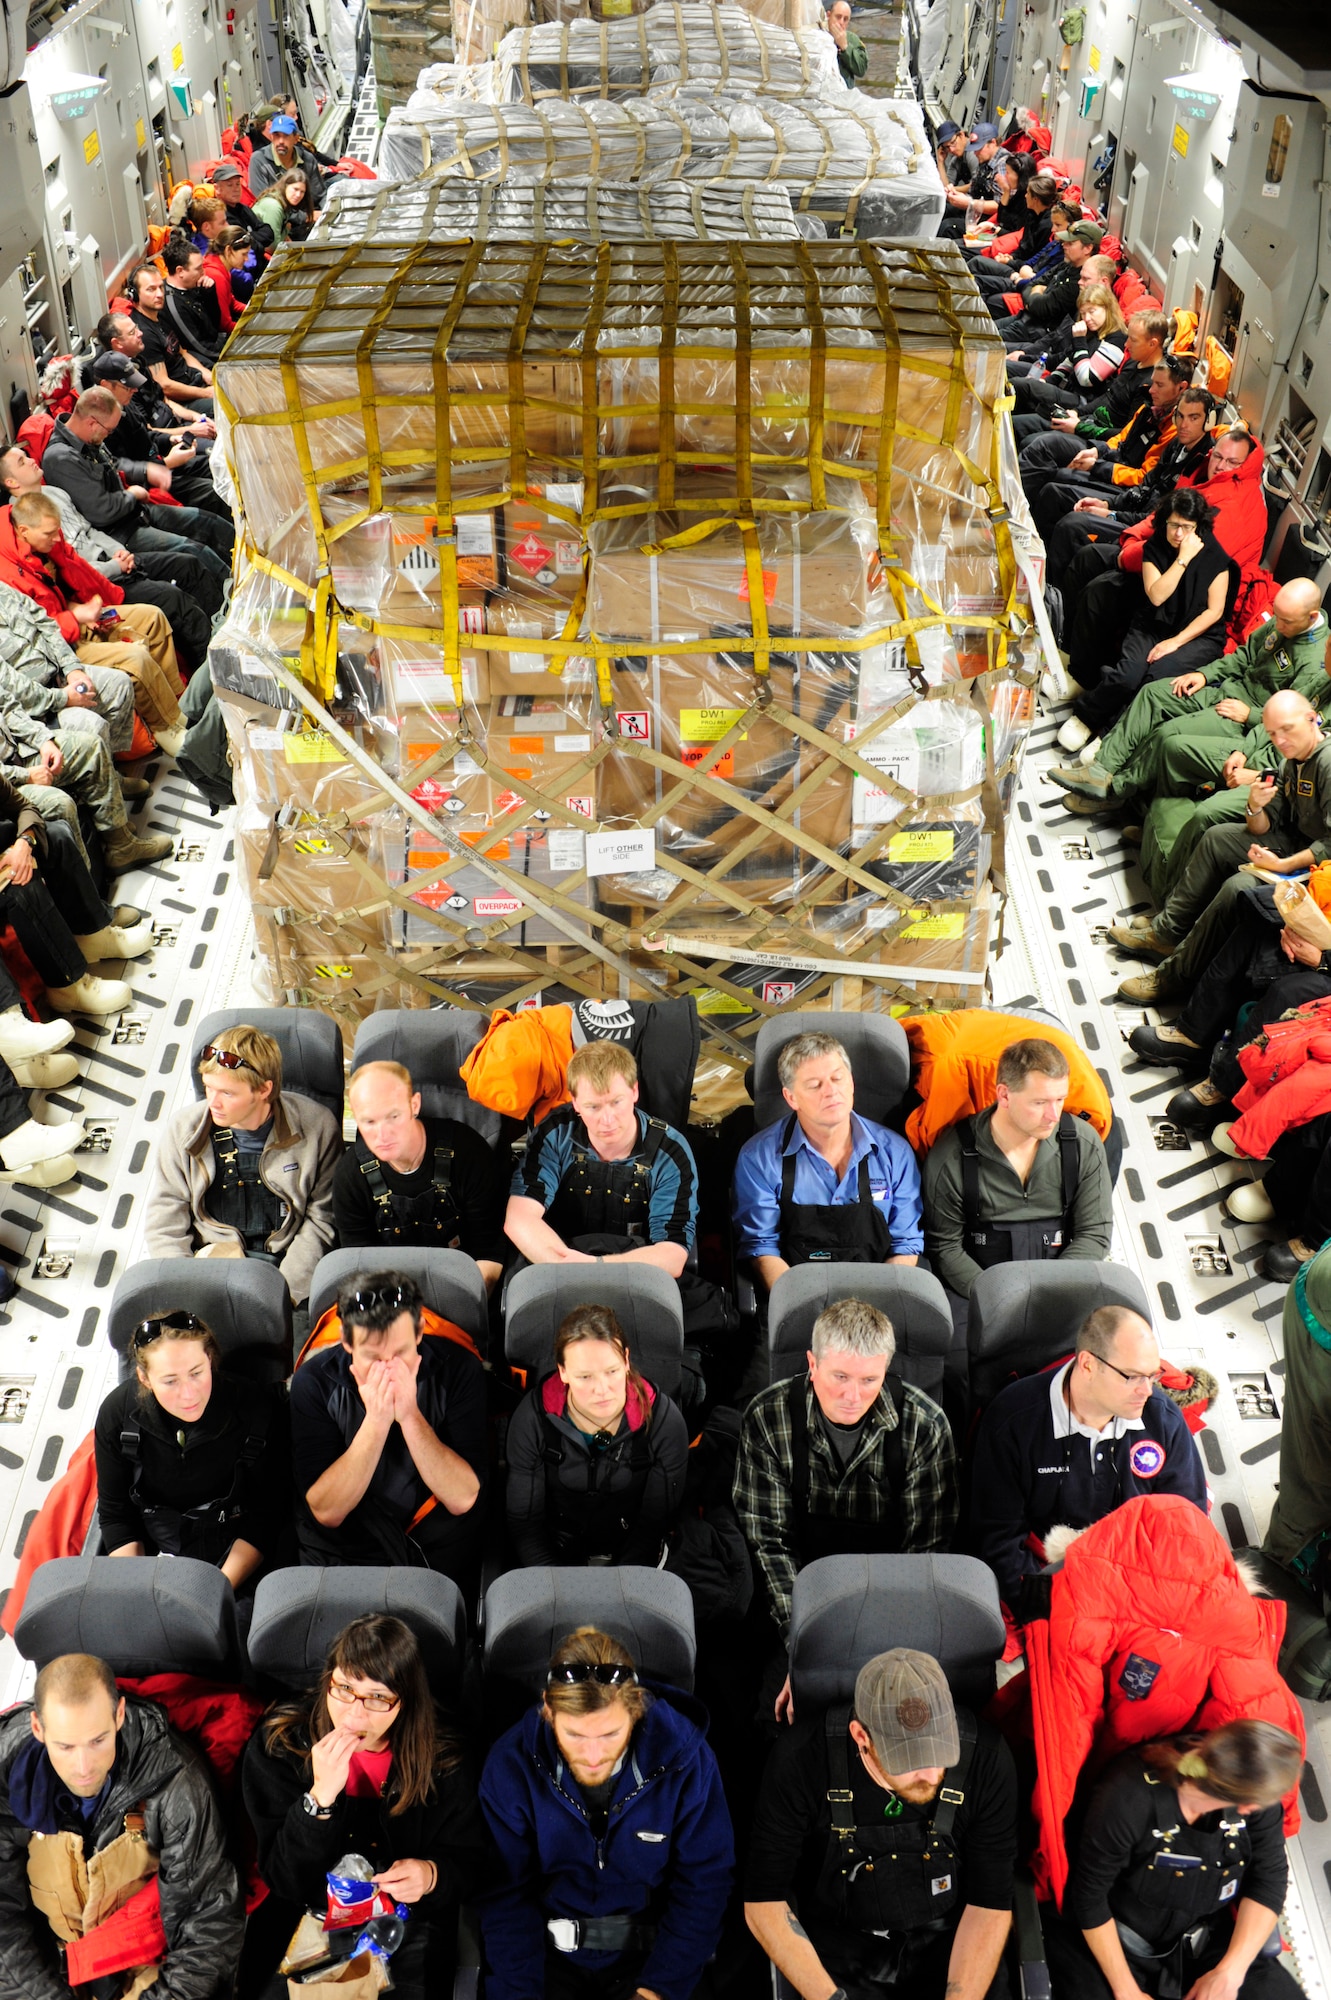 National Science Foundation personnel sit aboard a C-17 Globemaster III aircraft, deployed from Joint Base Lewis-McChord, Wash., Oct. 1, 2012. The aircraft, which departed Christchurch, New Zealand, delivered 76 NSF personnel and 64,000 pounds of cargo to McMurdo Station, Antarctica in support of Operation Deep freeze. (U.S. Air Force photo/Staff Sgt. Sean Tobin)